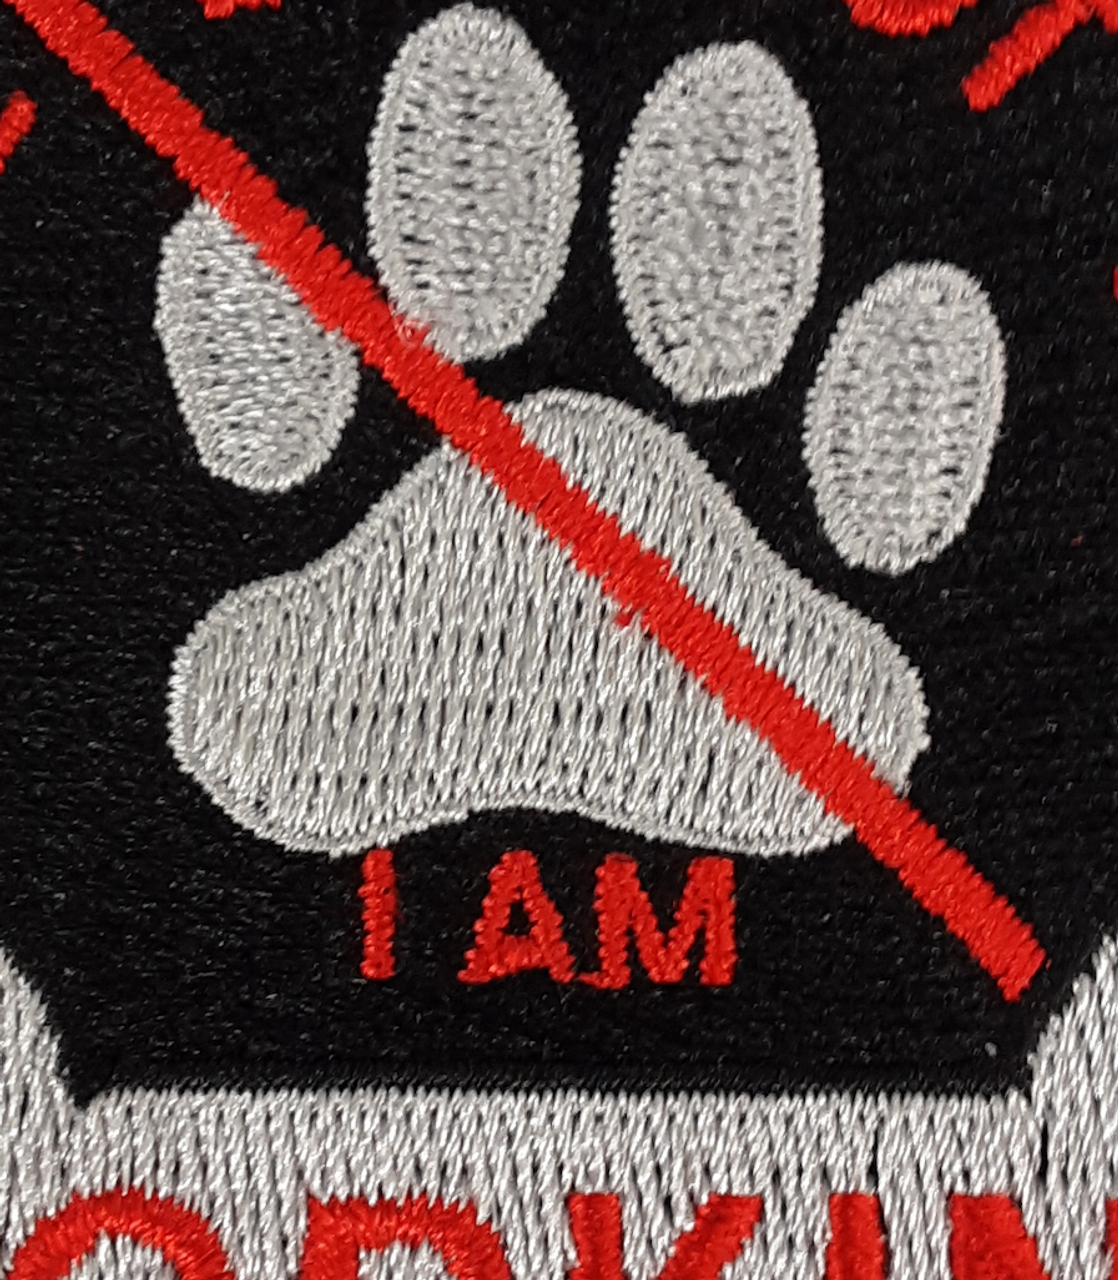 Working Dog Do Not Pet, I'm Working Patch (3-inch Round)